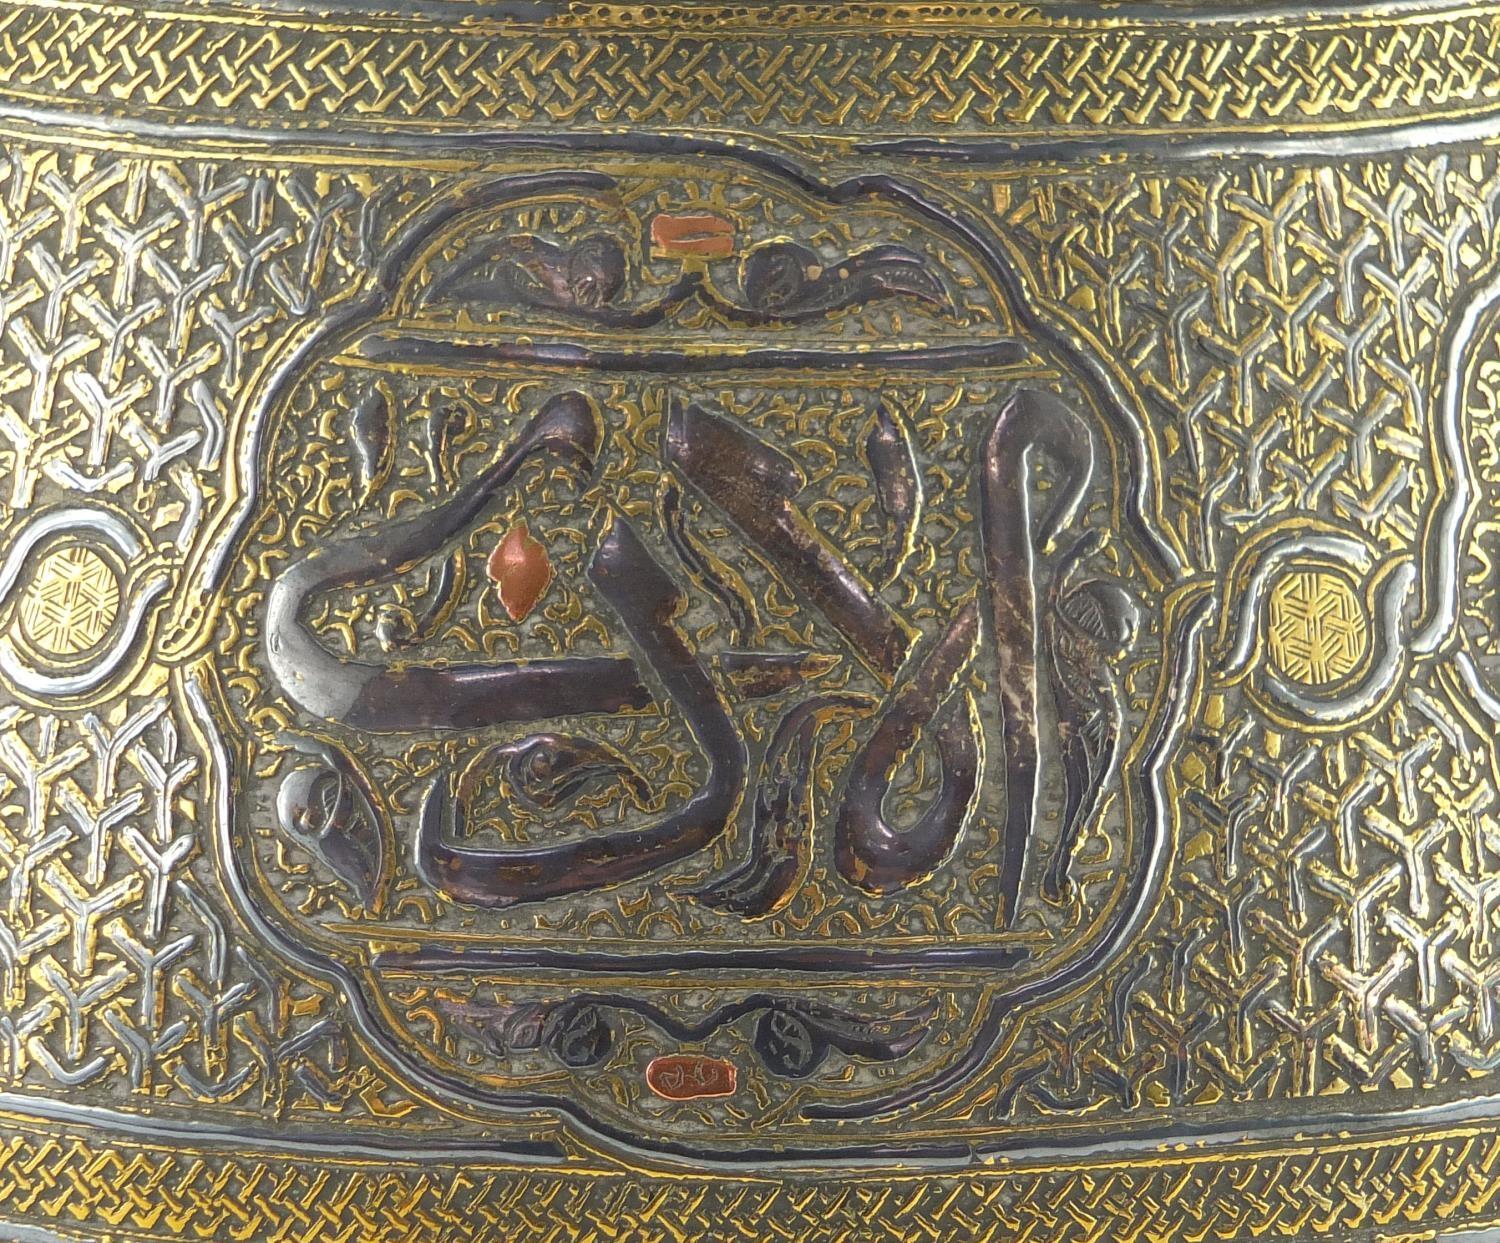 Cairoware brass bowl with silver inlay decorated with script and floral motifs, 25cm in diameter : - Image 3 of 5